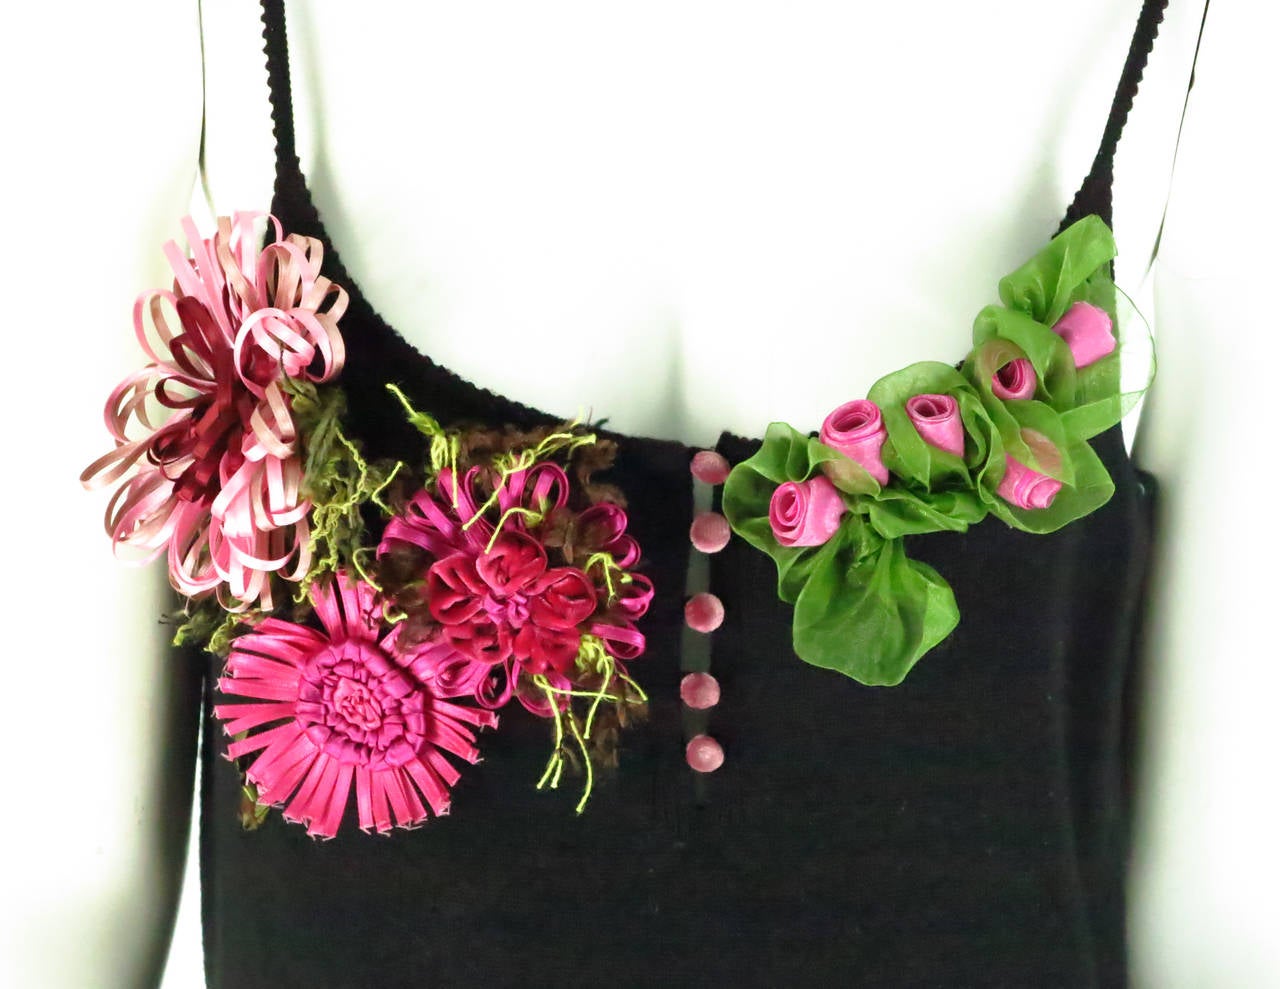 Fine black wool knit tank top with a ribbon applique bust...A gardens worth of velvet, satin and organza flowers at the upper bust, with pink velvet buttons at the front center giving a peek of skin...The wool is soft...Narrow shoulder straps with a